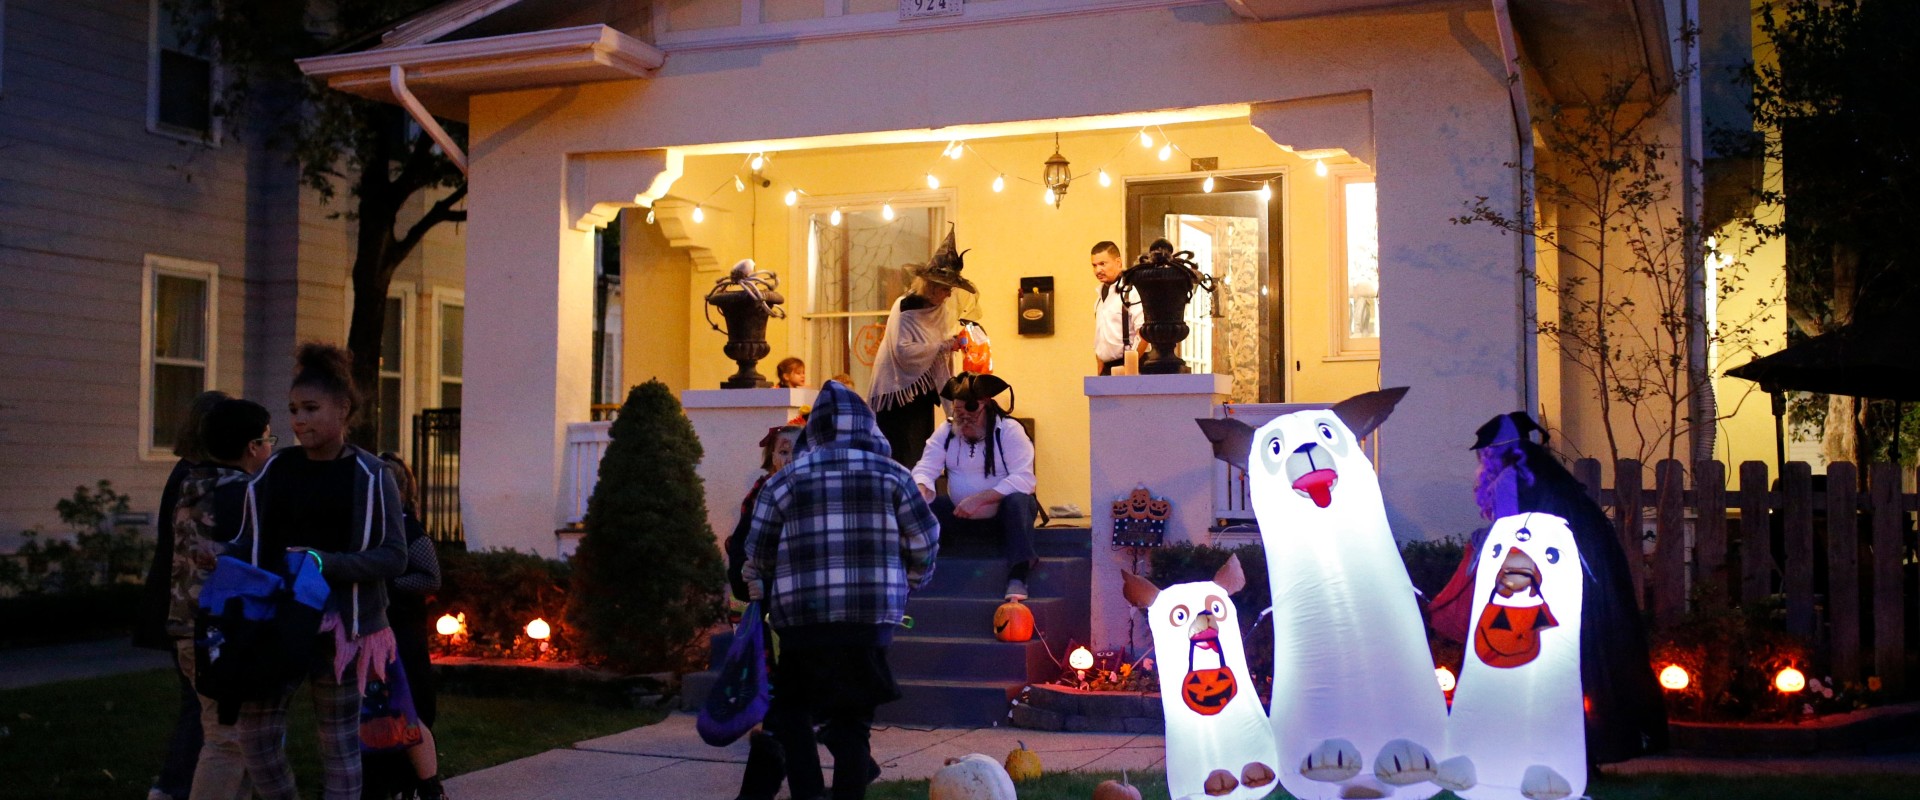 The Best Trick-or-Treating Spots in Oklahoma City: An Expert's Guide